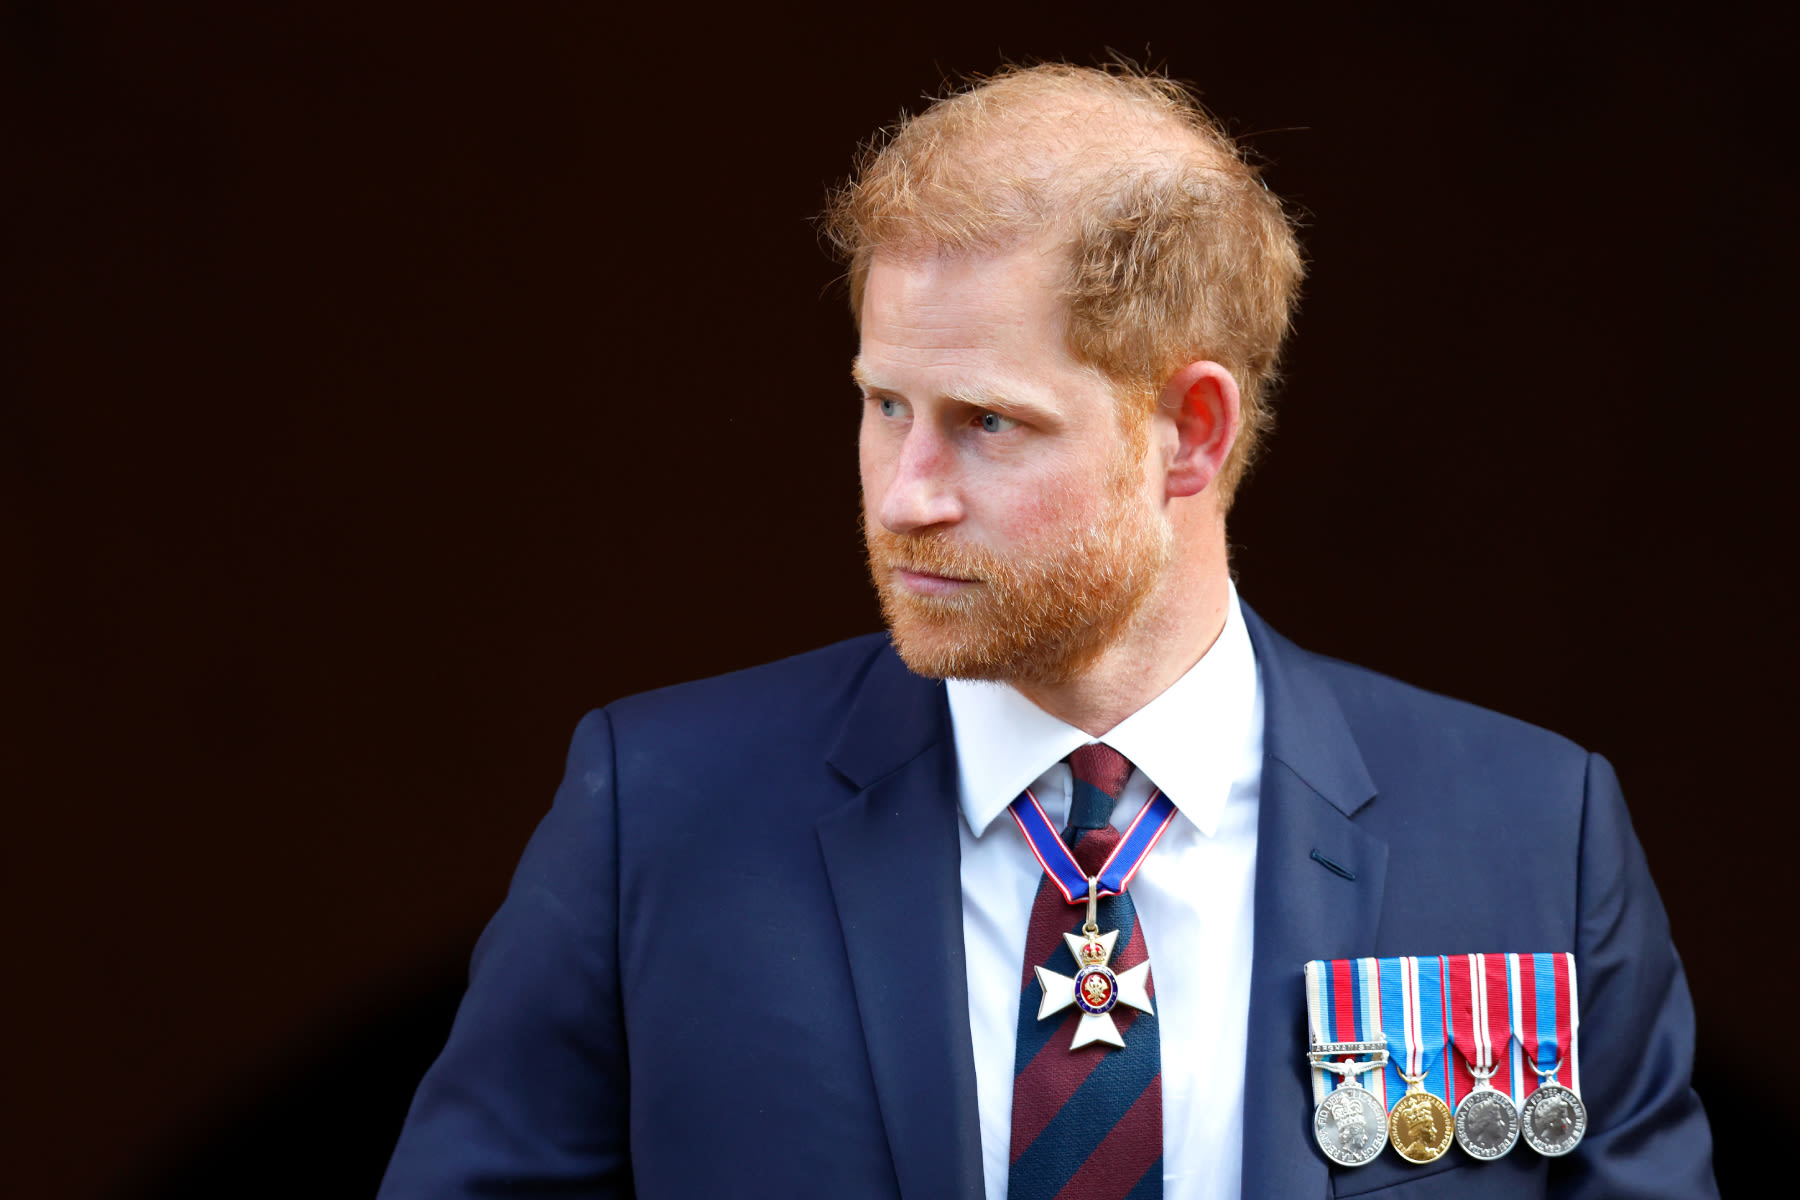 Prince Harry Can’t Add Rupert Murdoch, Princess Diana, Meghan Markle Claims to Tabloid Snooping Suit